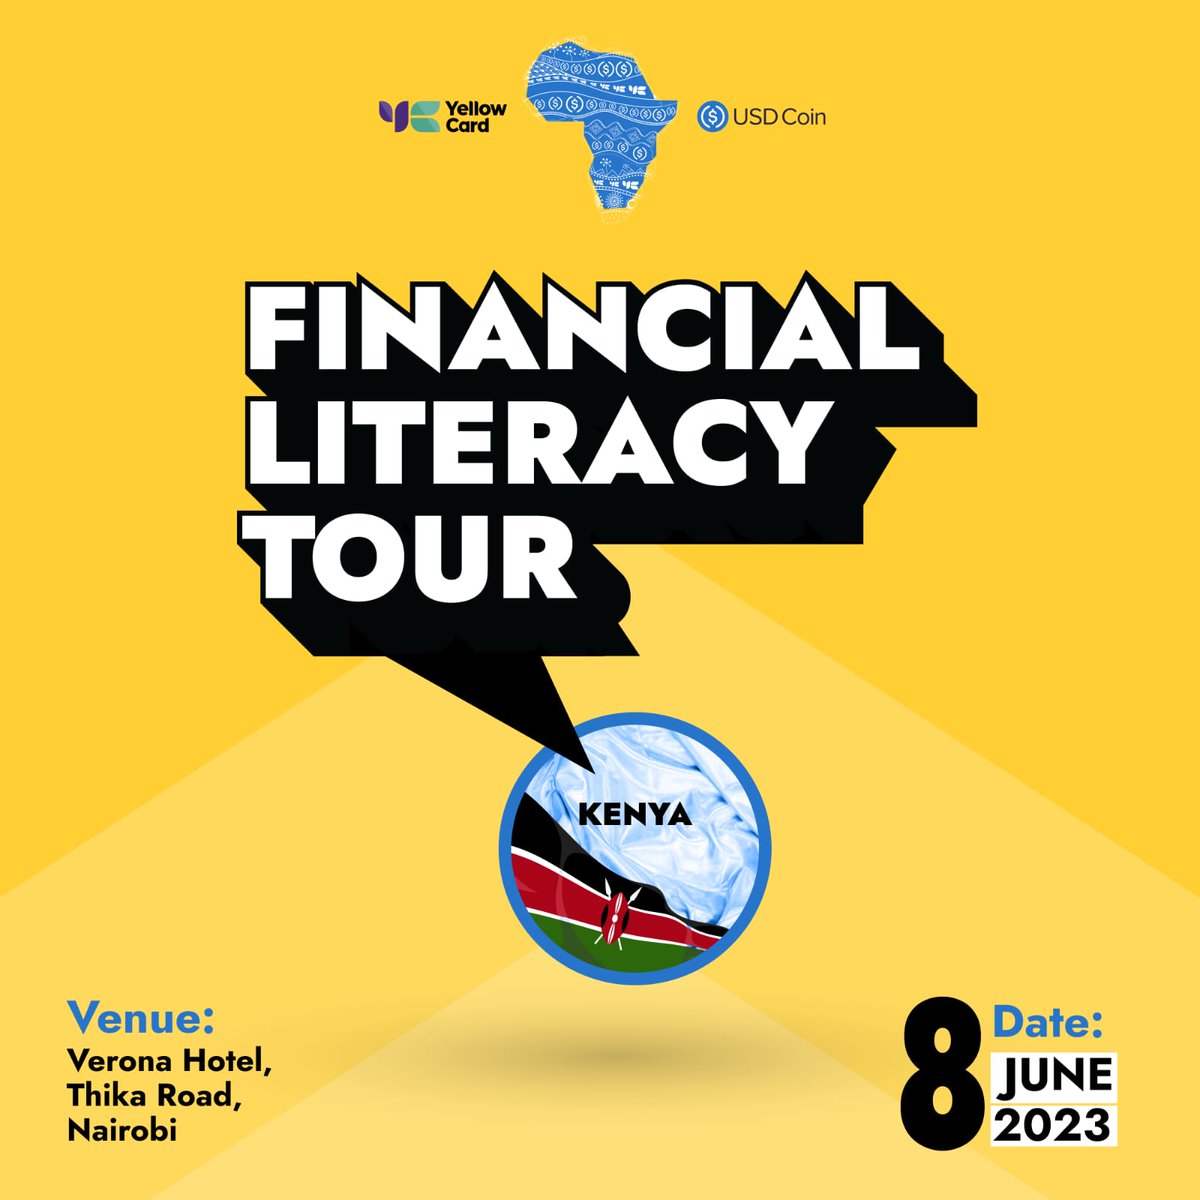 this financial literacy tour will enable young minds to think and work crypto as the digital currency is safer and efficient more than the traditional one
#YCFinancialLiteracyTour 

Crypto with YelloCard